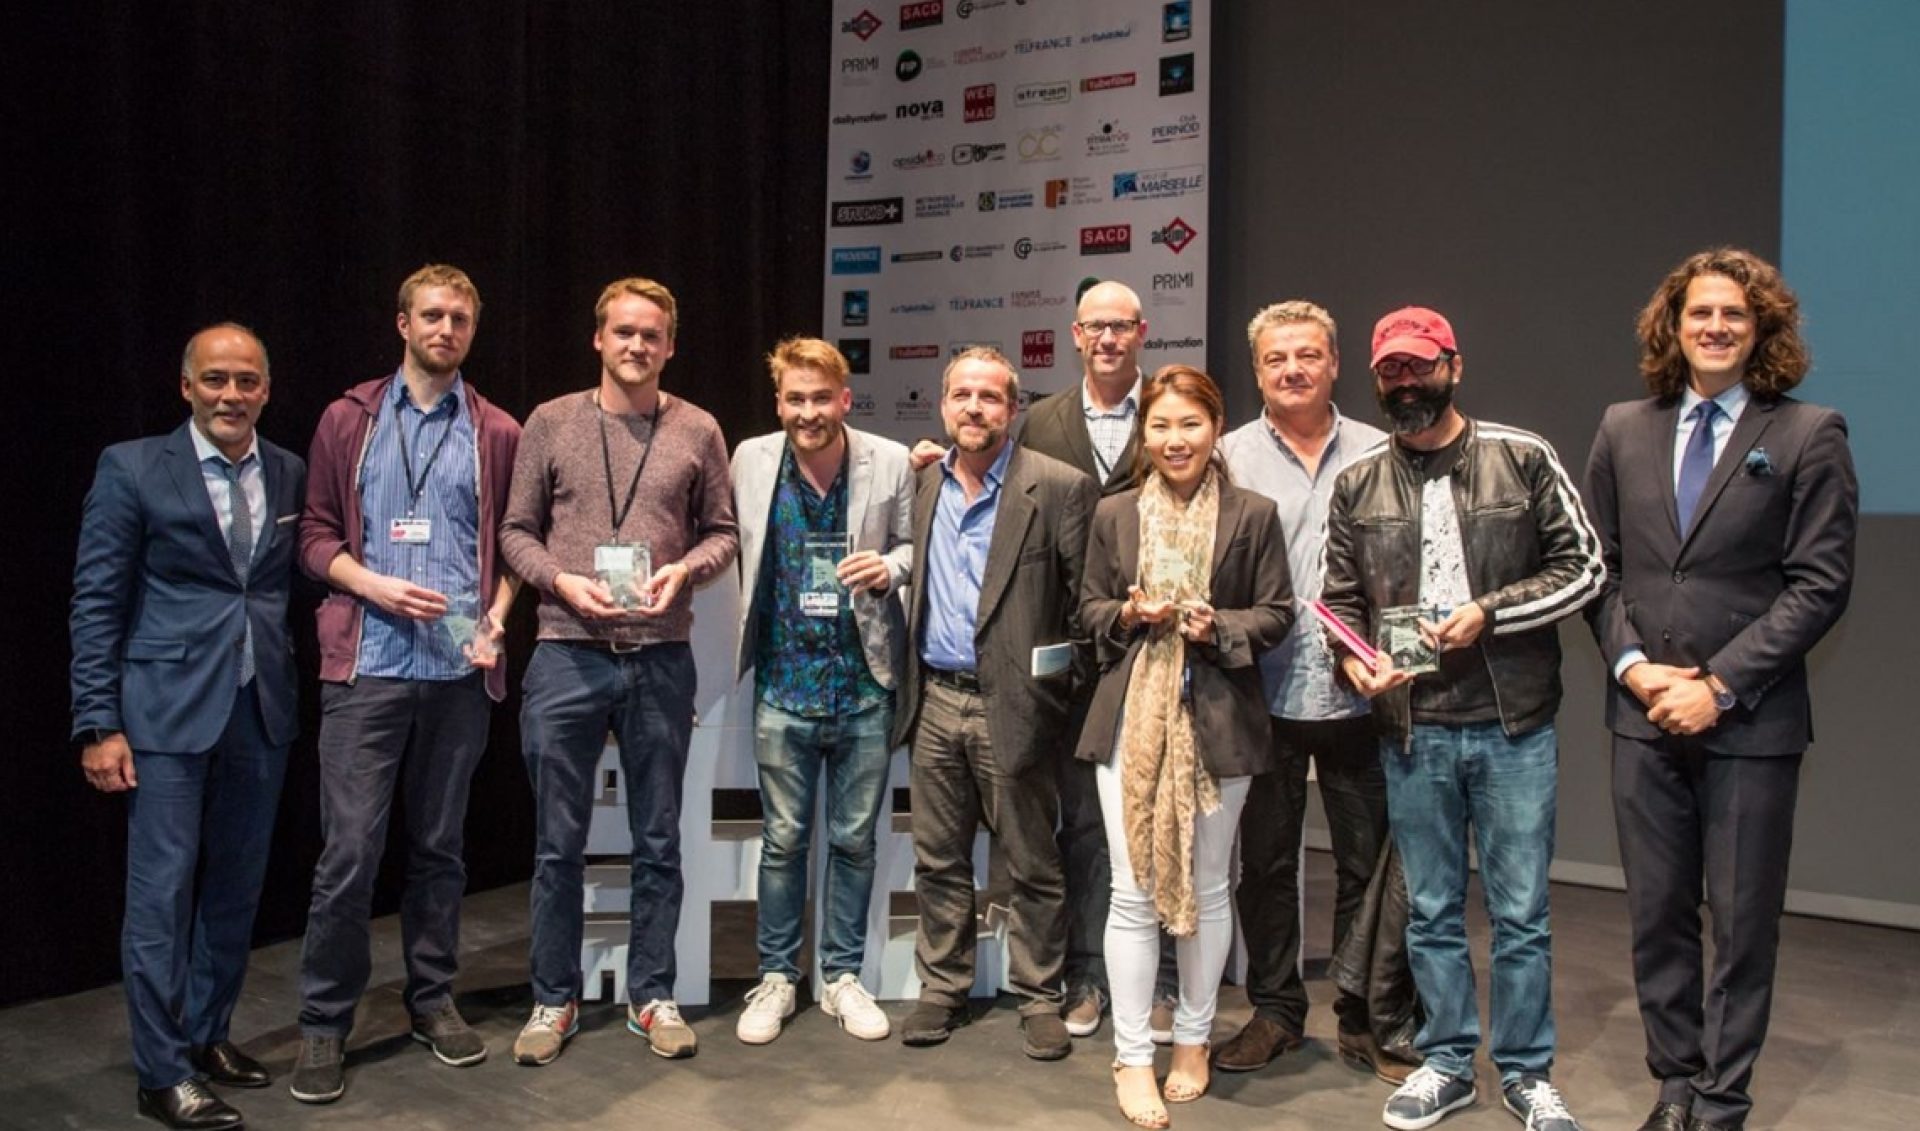 Marseille Web Fest Announces Top Prize Winners, Led By ‘Dramaworld’ And ‘Whatever, Linda’